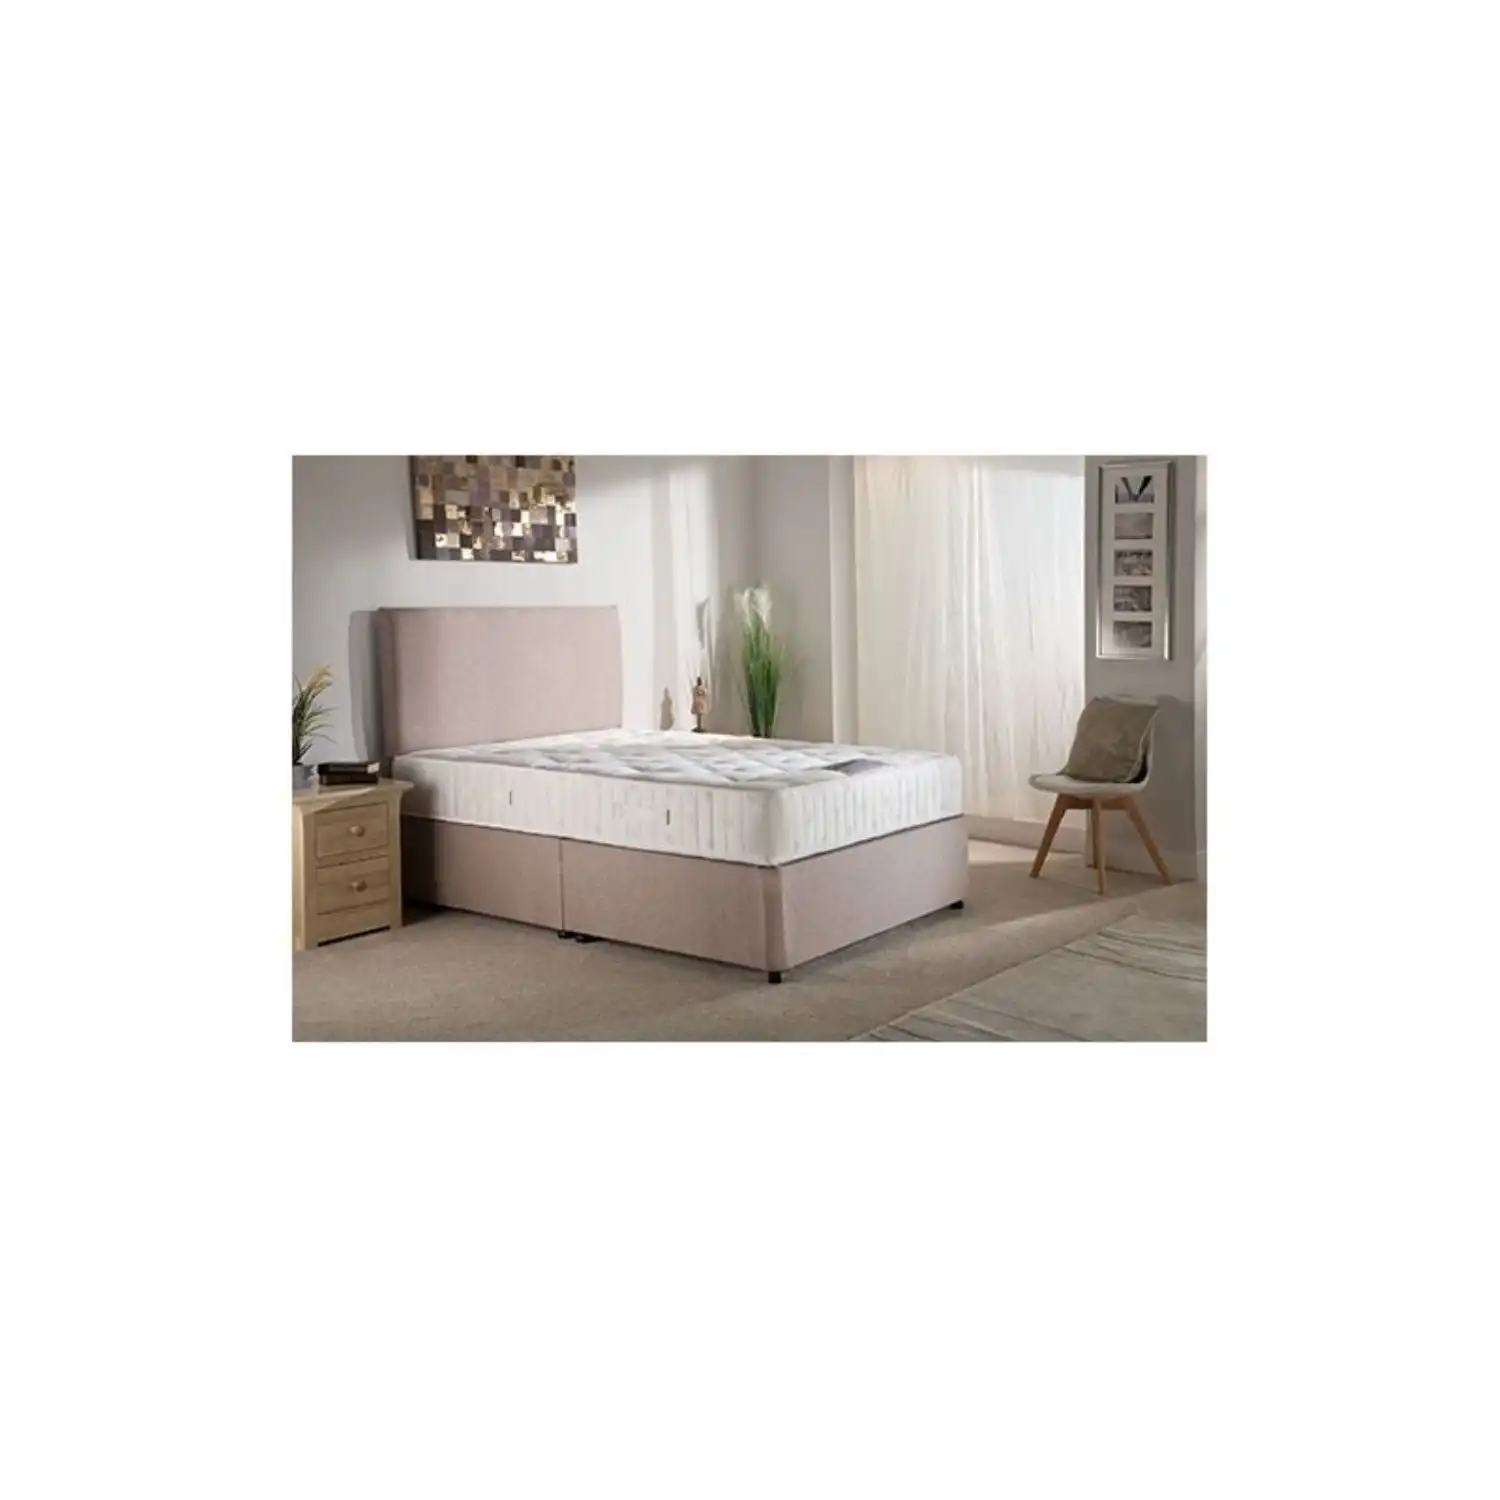 Contract Wentworth Gemini Double Spring Divan Sets